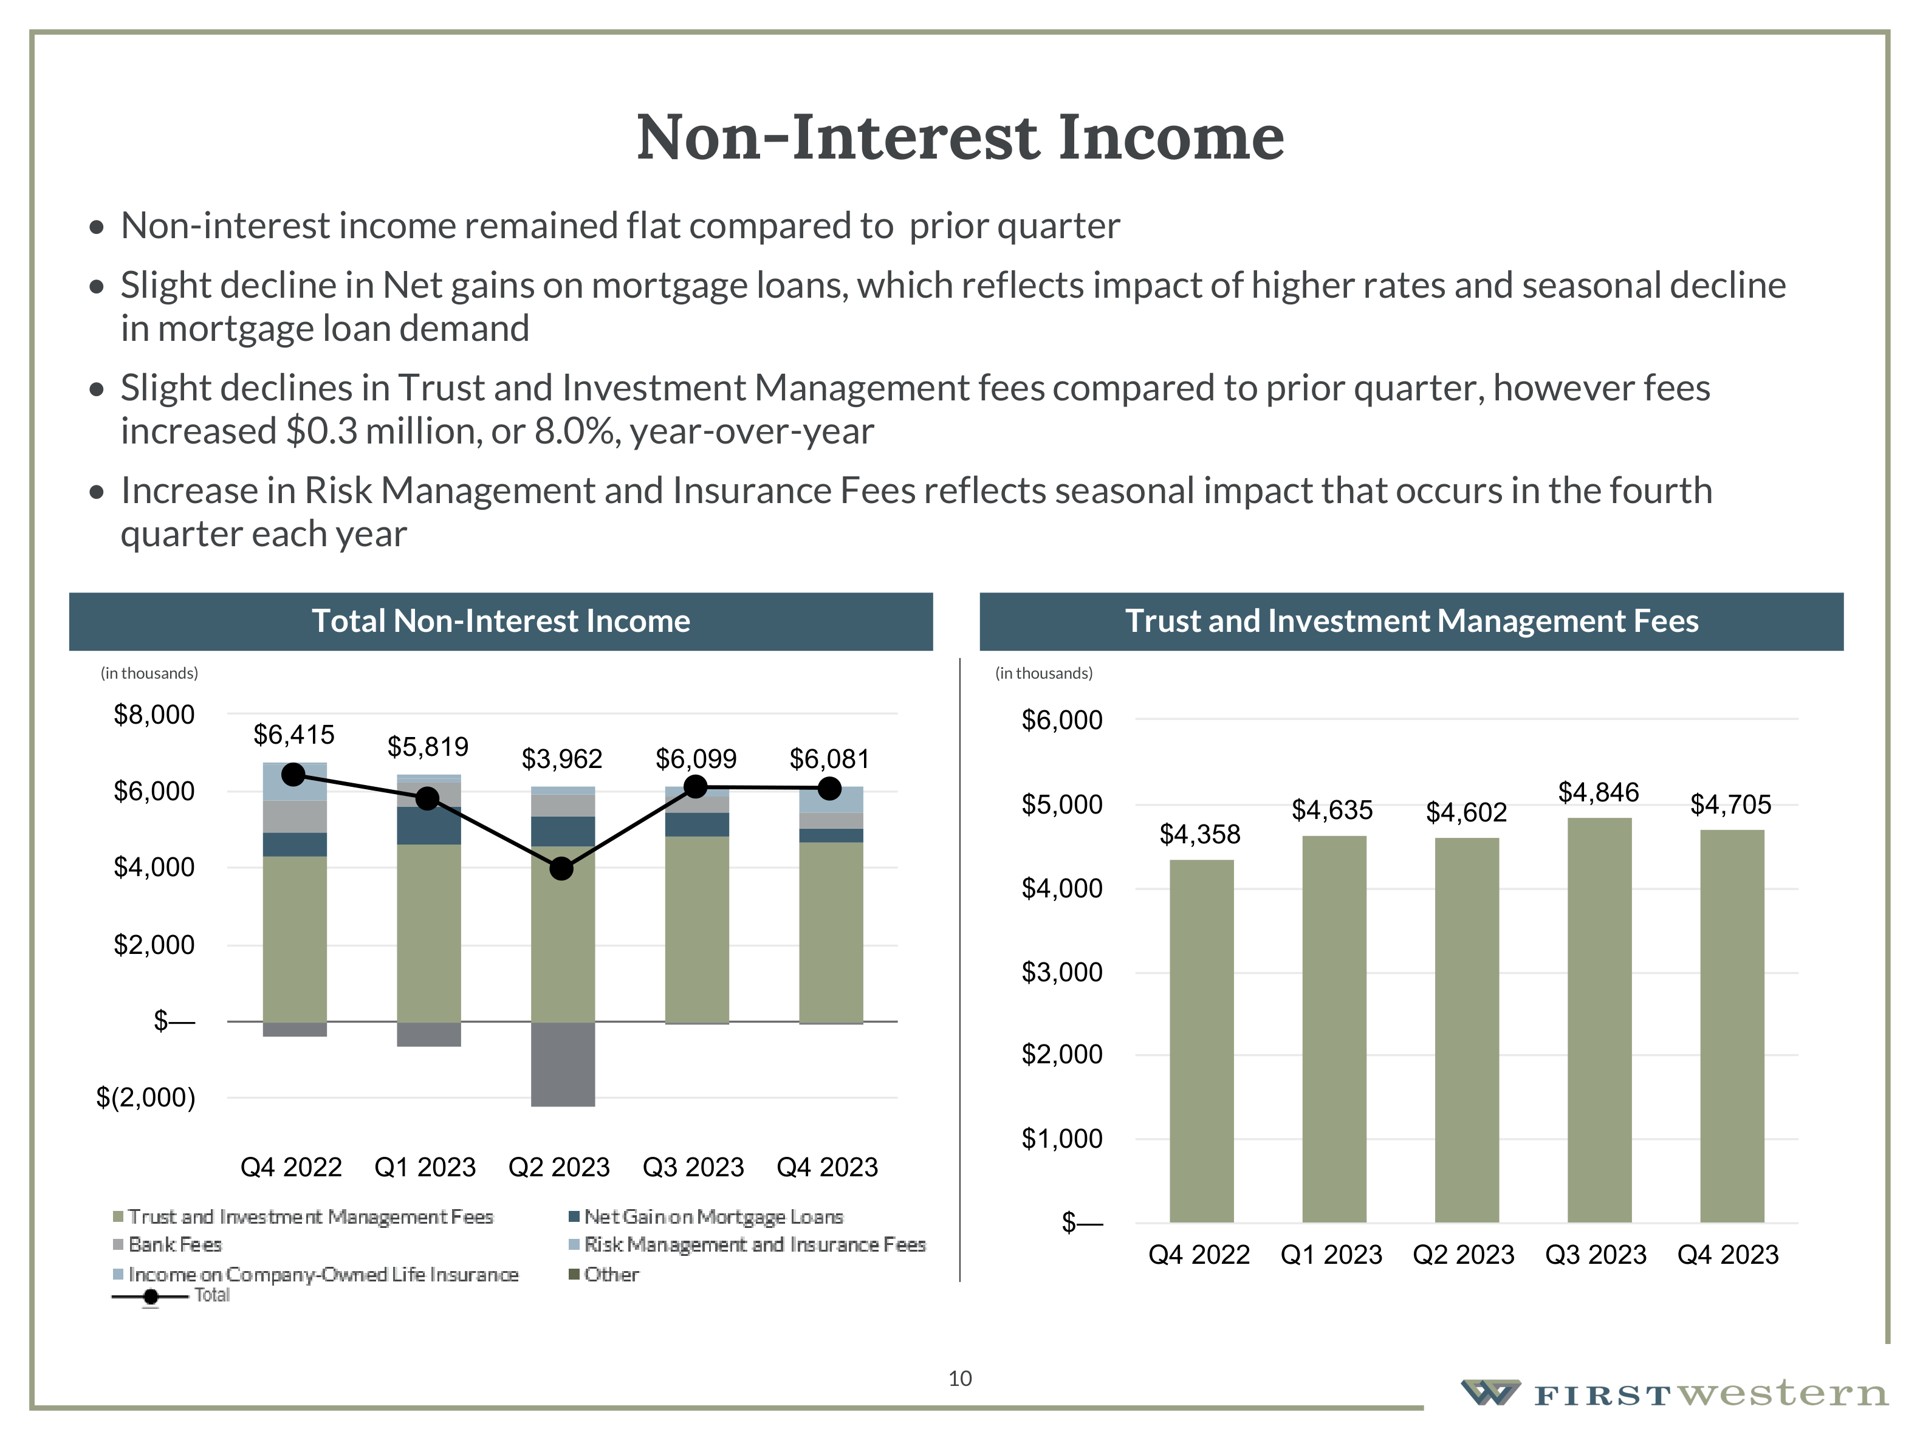 non interest income non interest income remained flat compared to prior quarter slight decline in net gains on mortgage loans which reflects impact of higher rates and seasonal decline in mortgage loan demand slight declines in trust and investment management fees compared to prior quarter however fees increased million or year over year increase in risk management and insurance fees reflects seasonal impact that occurs in the fourth quarter each year total non interest income trust and investment management fees bank | First Western Financial